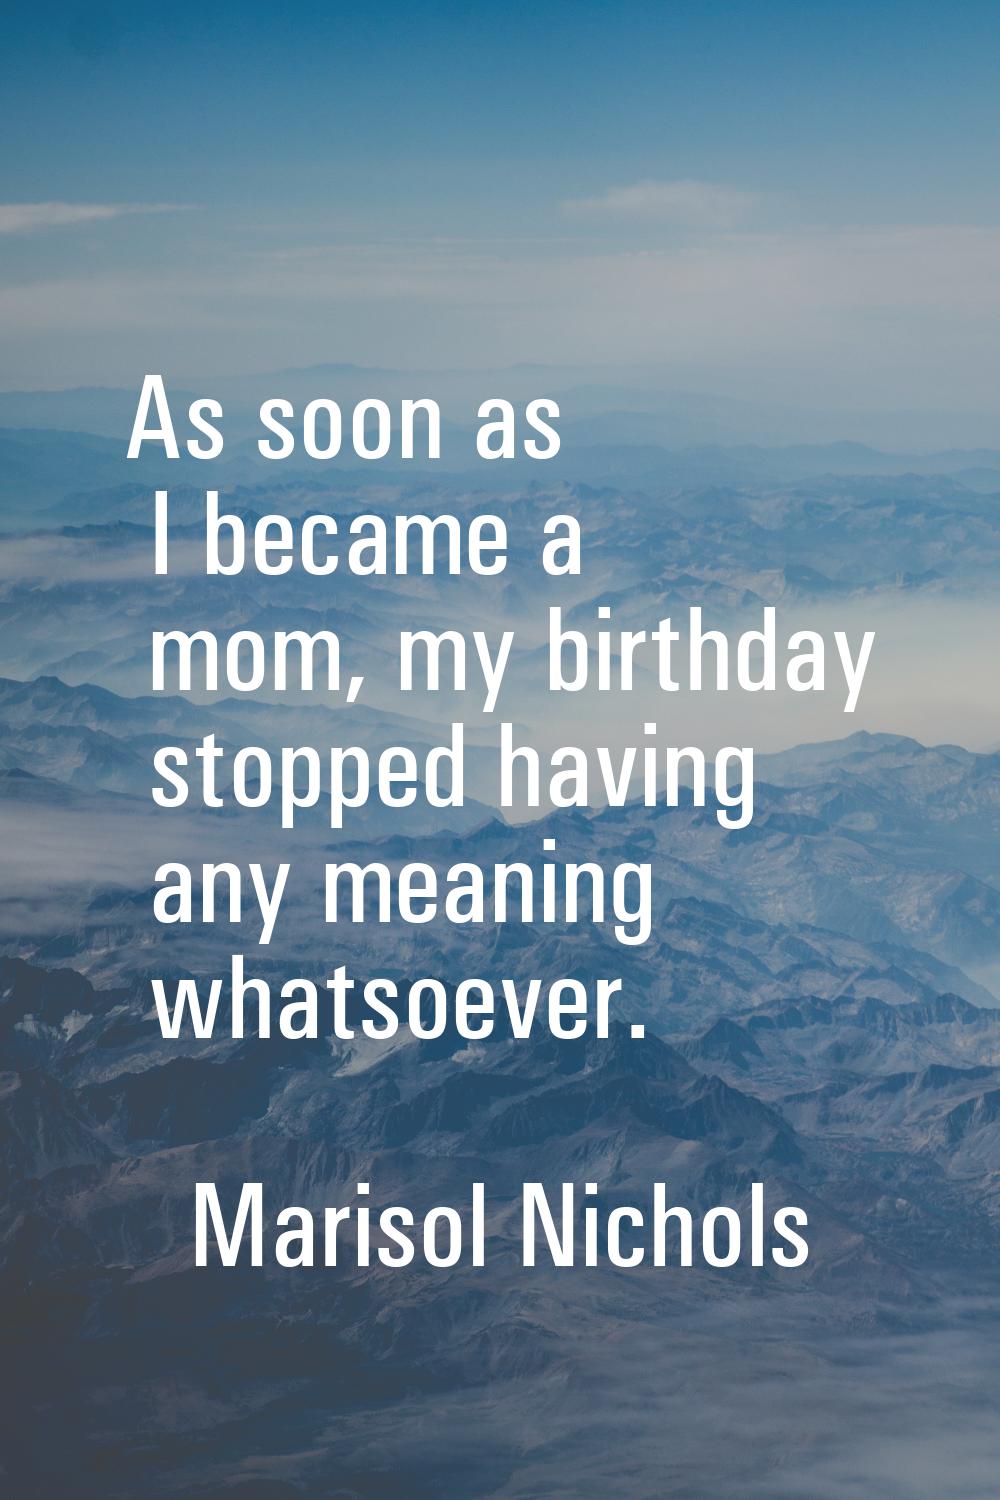 As soon as I became a mom, my birthday stopped having any meaning whatsoever.